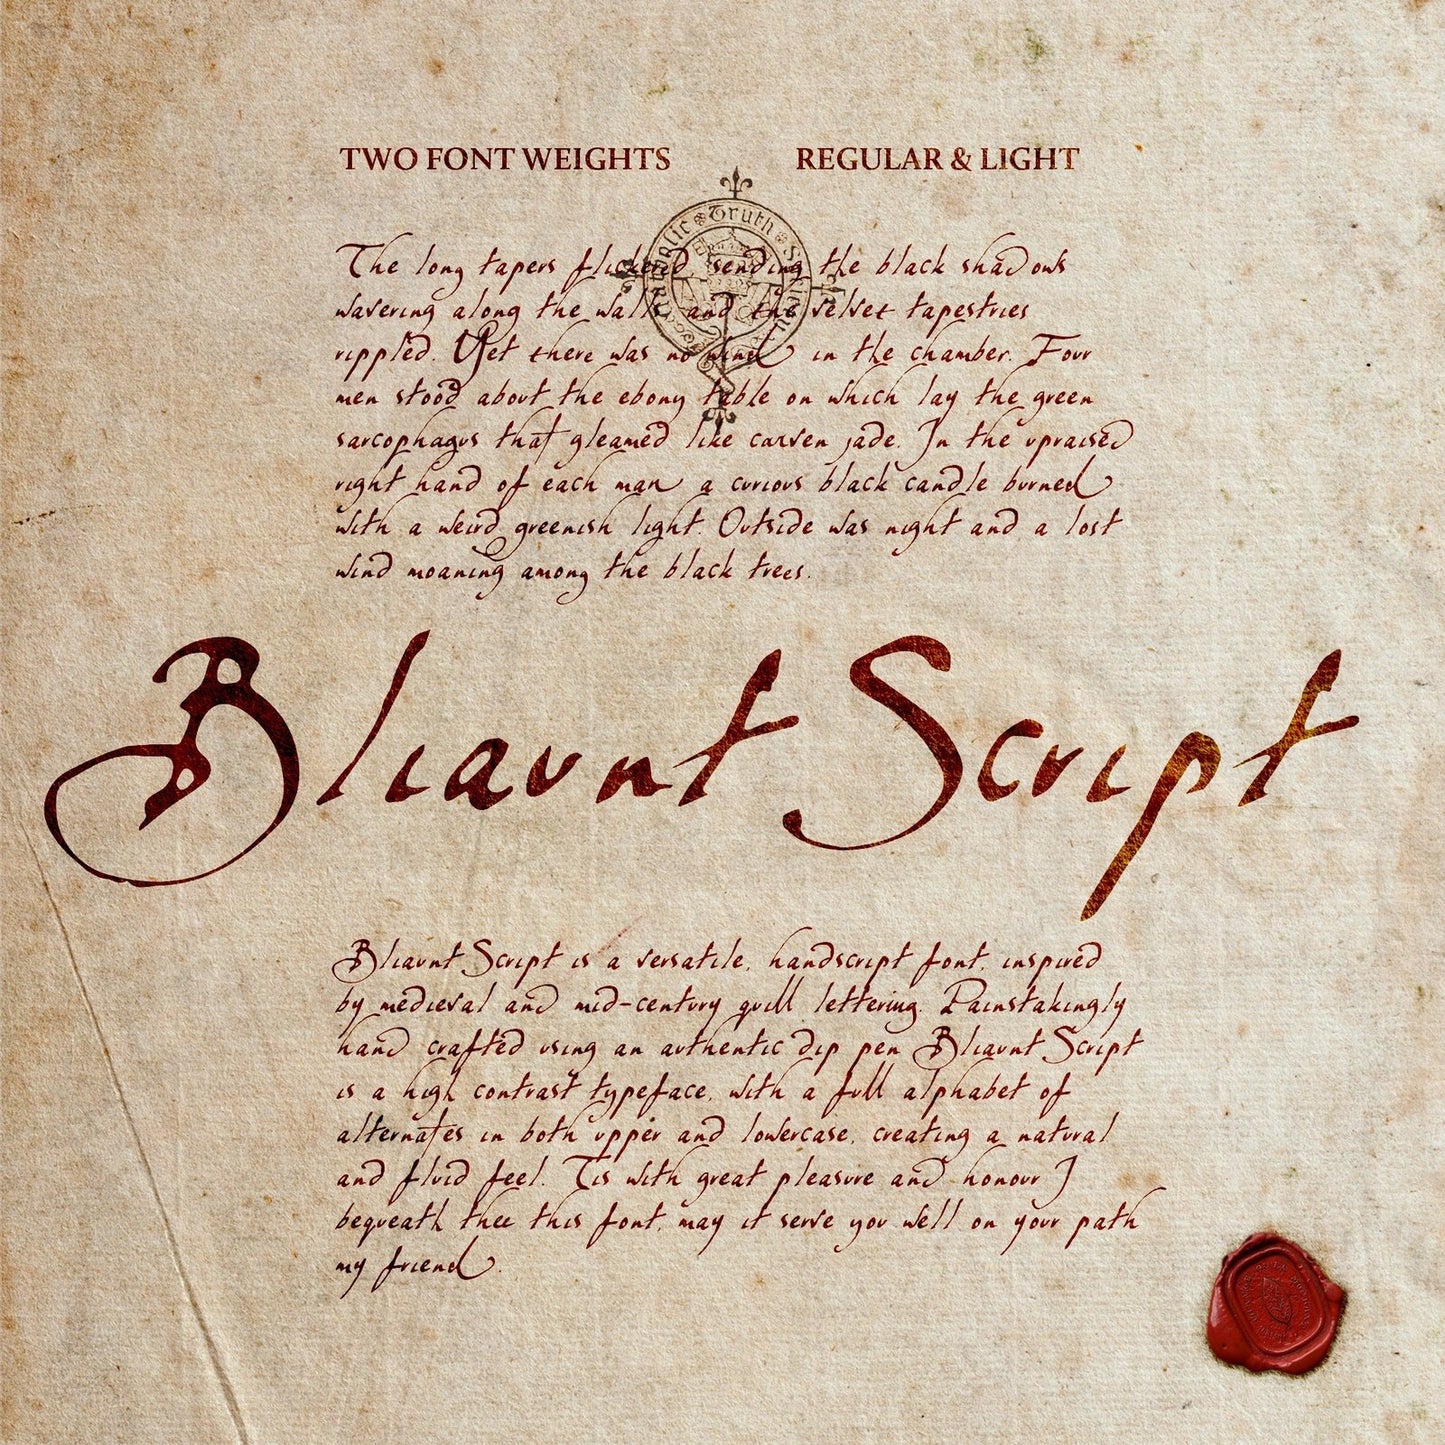 Aged paper texture with dark sepia text showing the Bliaunt Script font name and a red wax seal in the bottom right corner